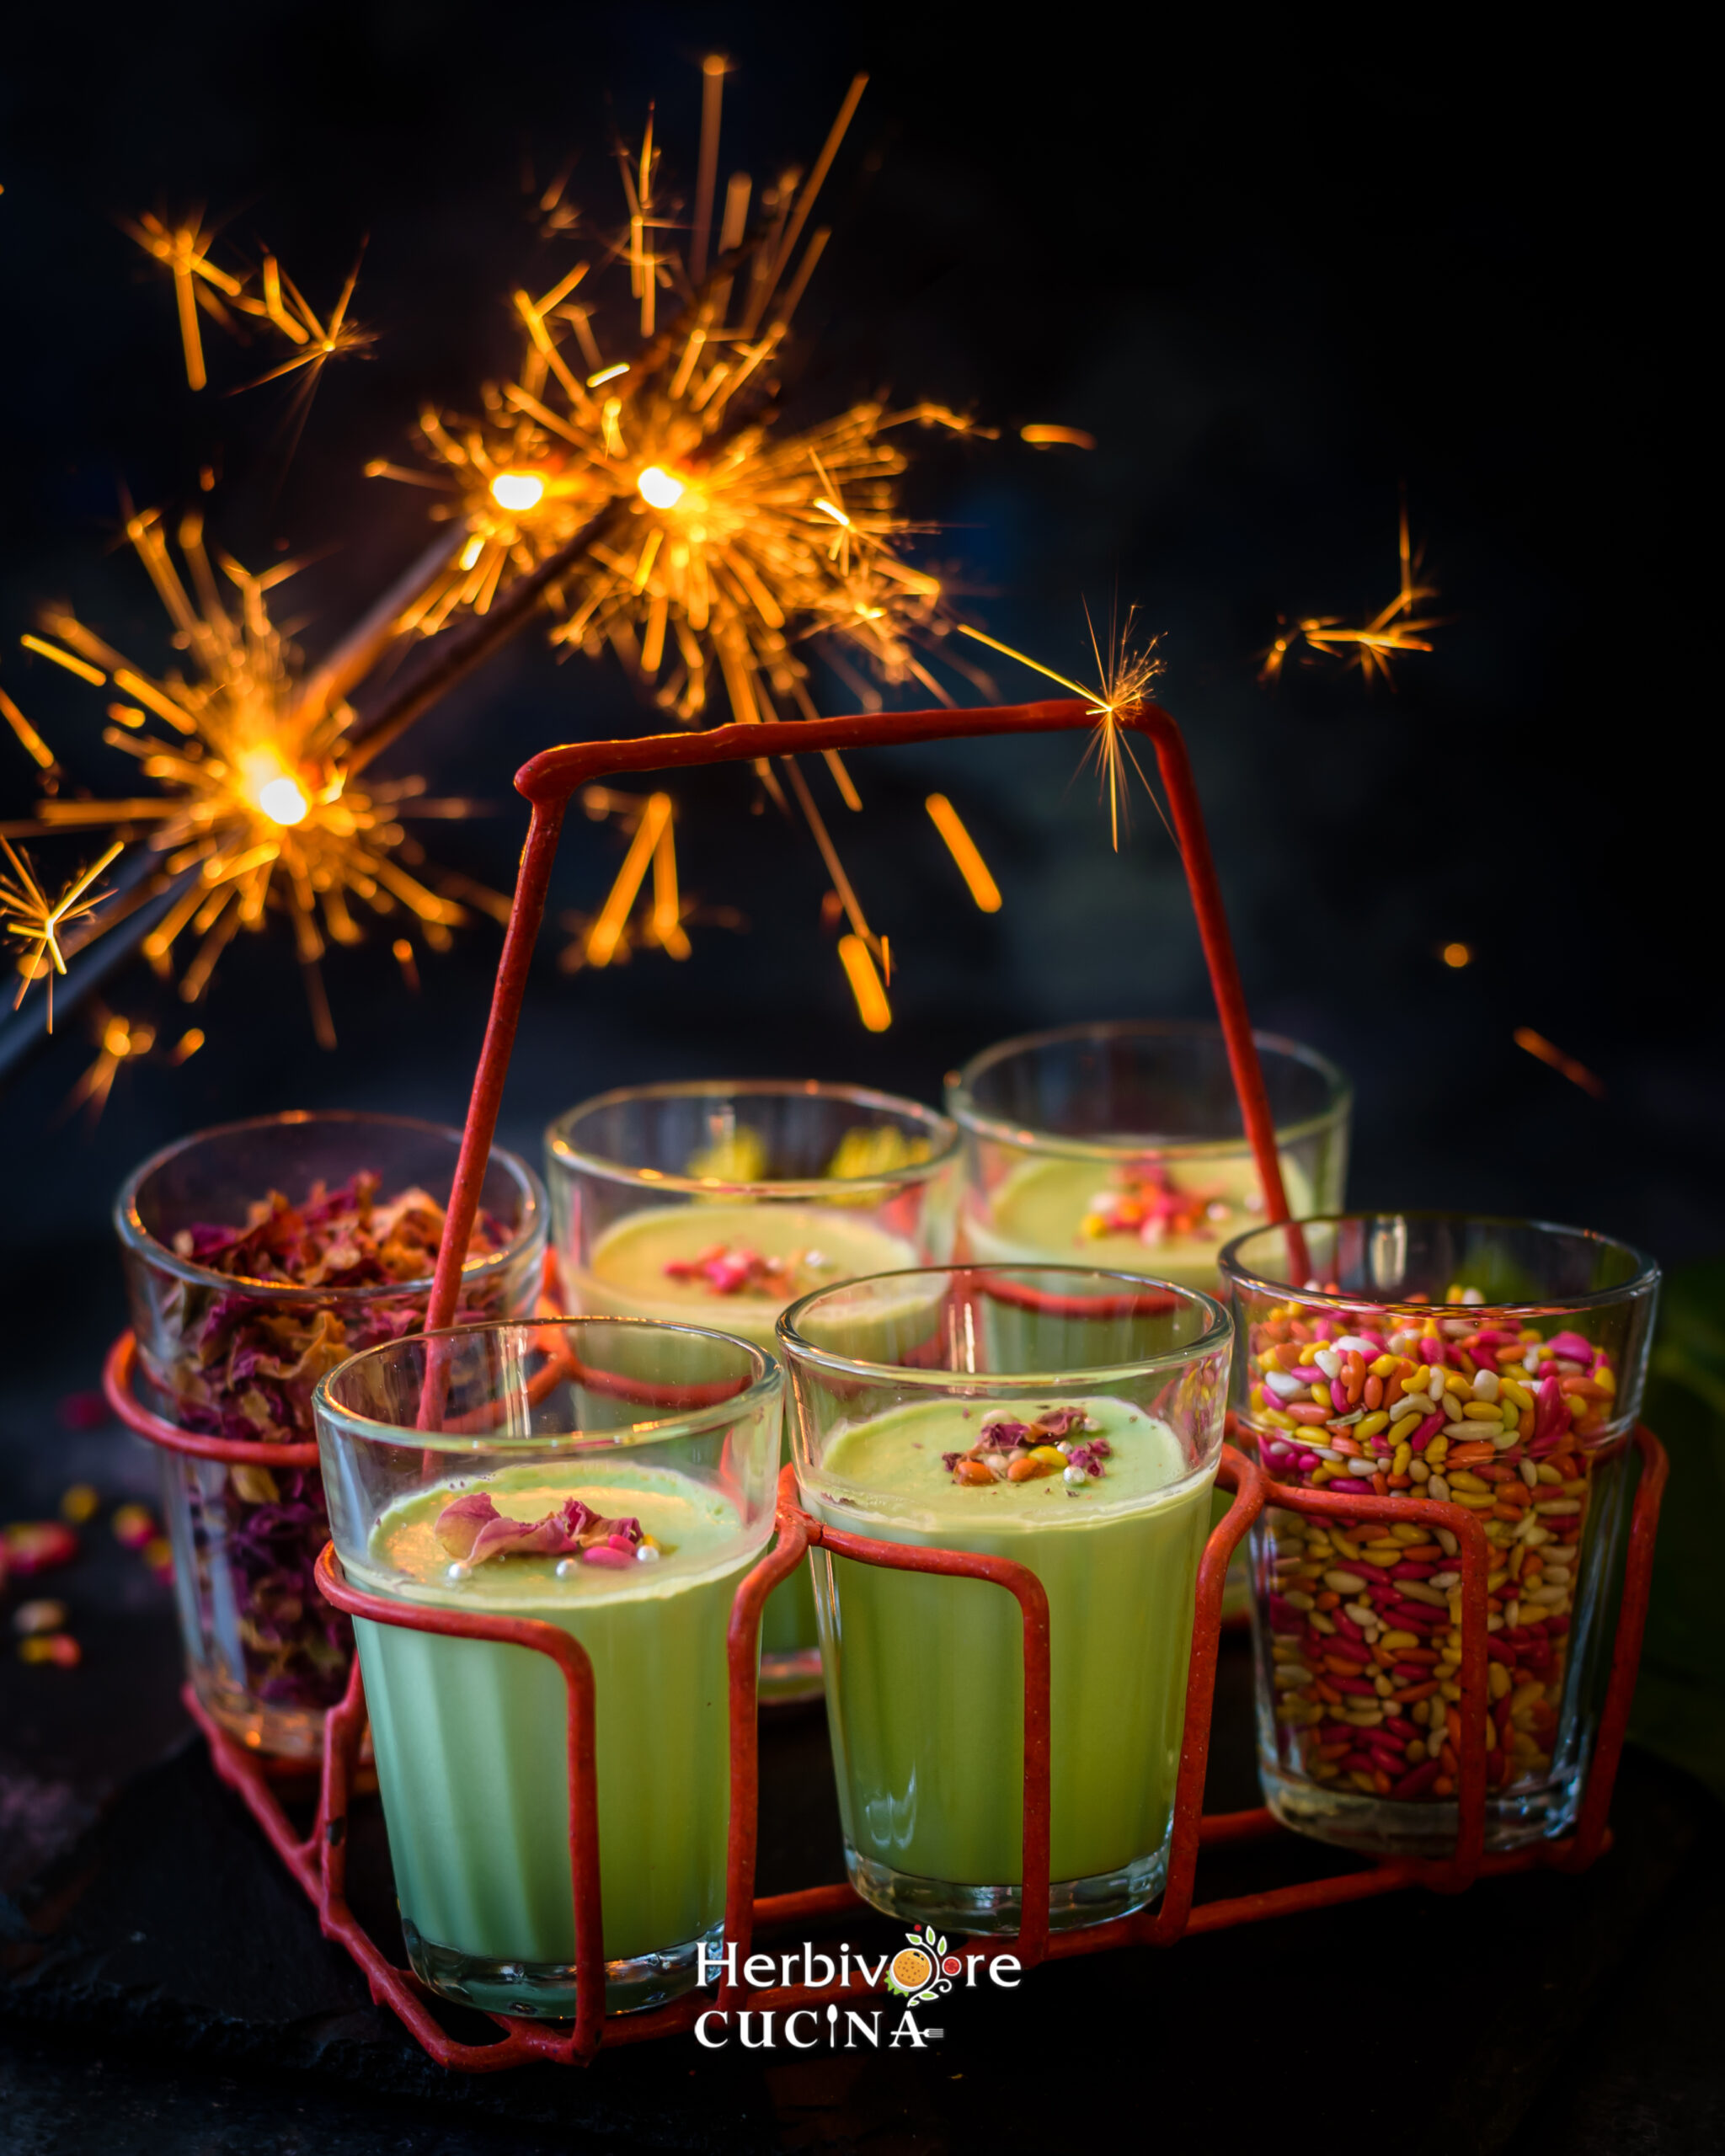 Four bowls of paan panna cotta and two bowls with add-ins against a lighted firework on a dark background. 